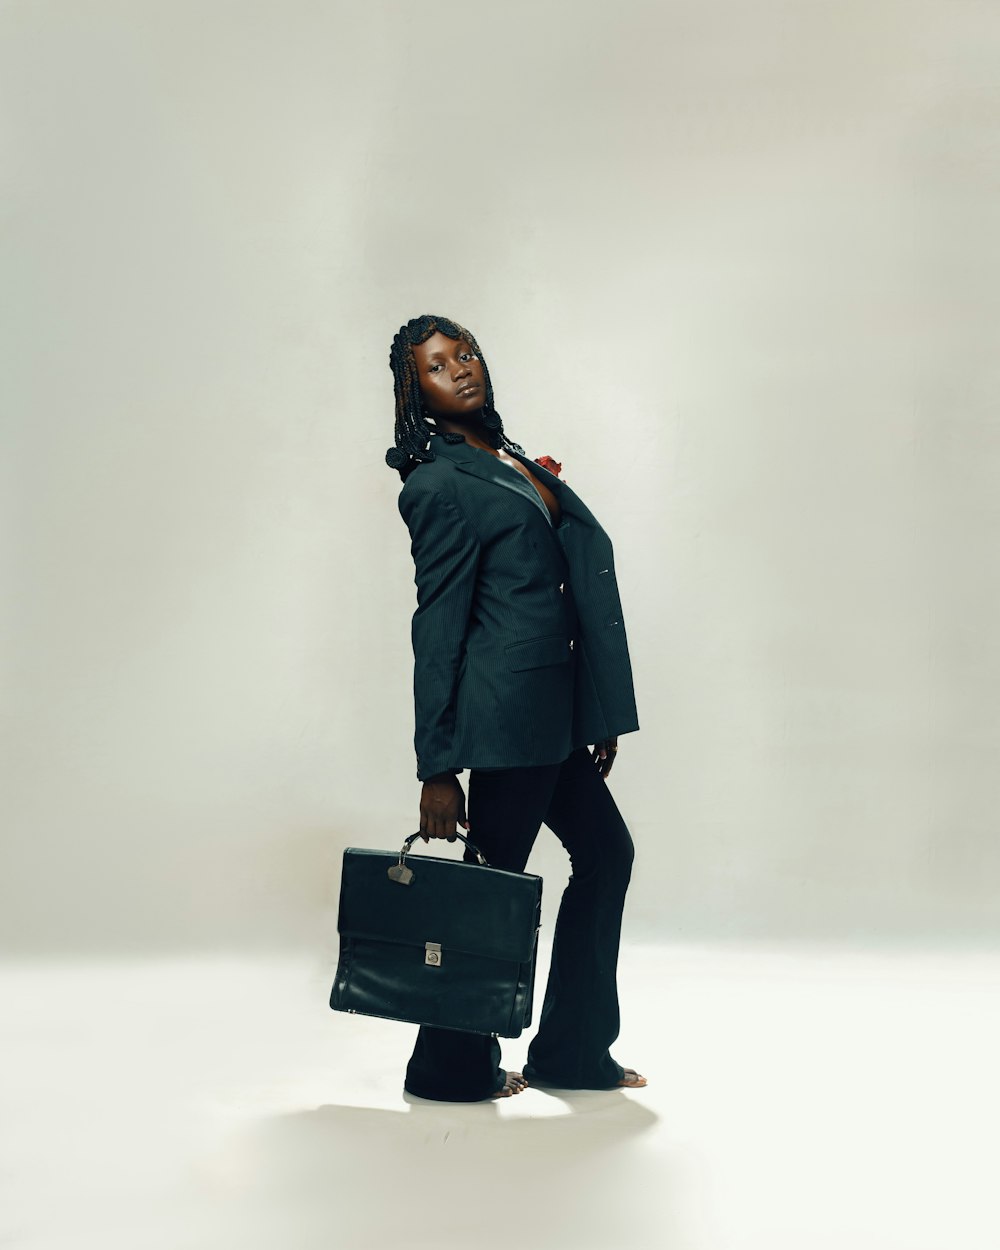 a woman in a suit holding a briefcase